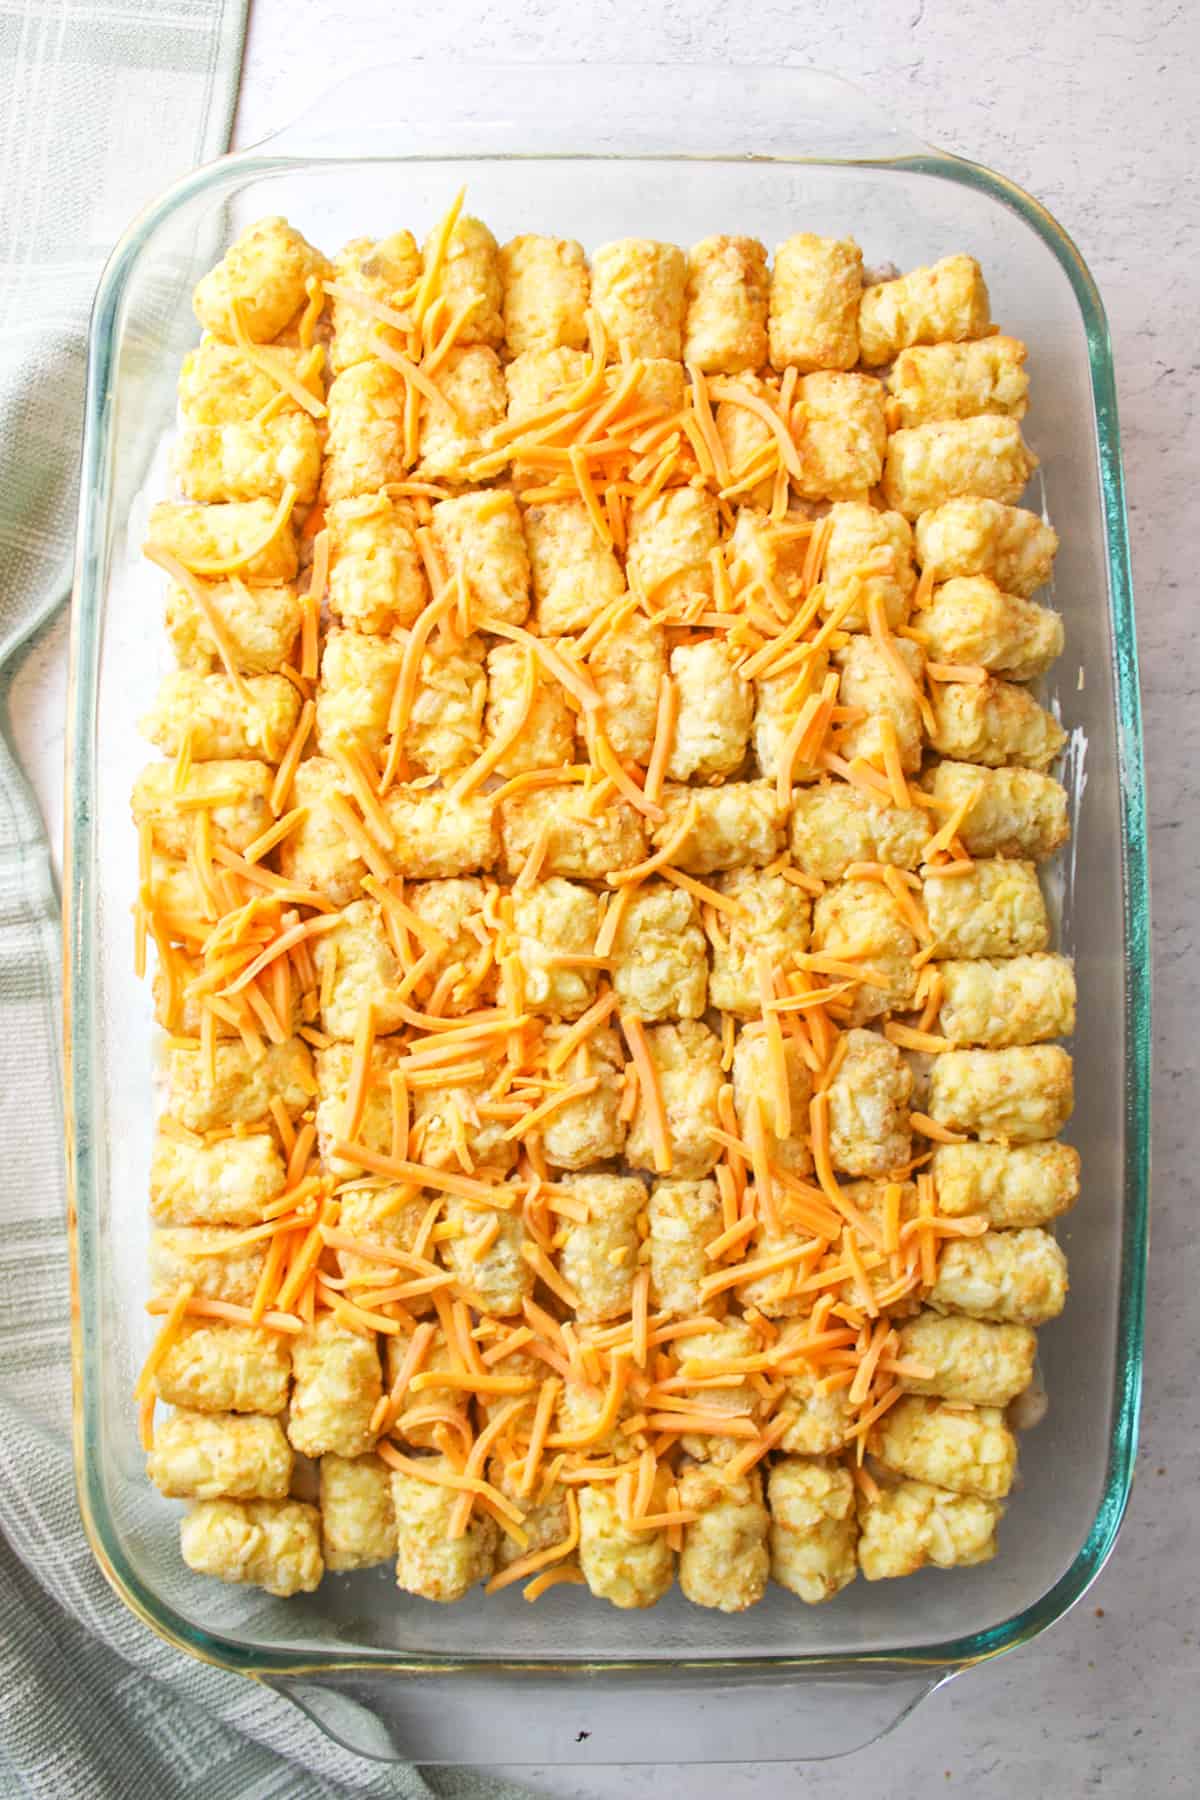 sprinkled cheese on top of tater tots in an unbaked tater tot casserole